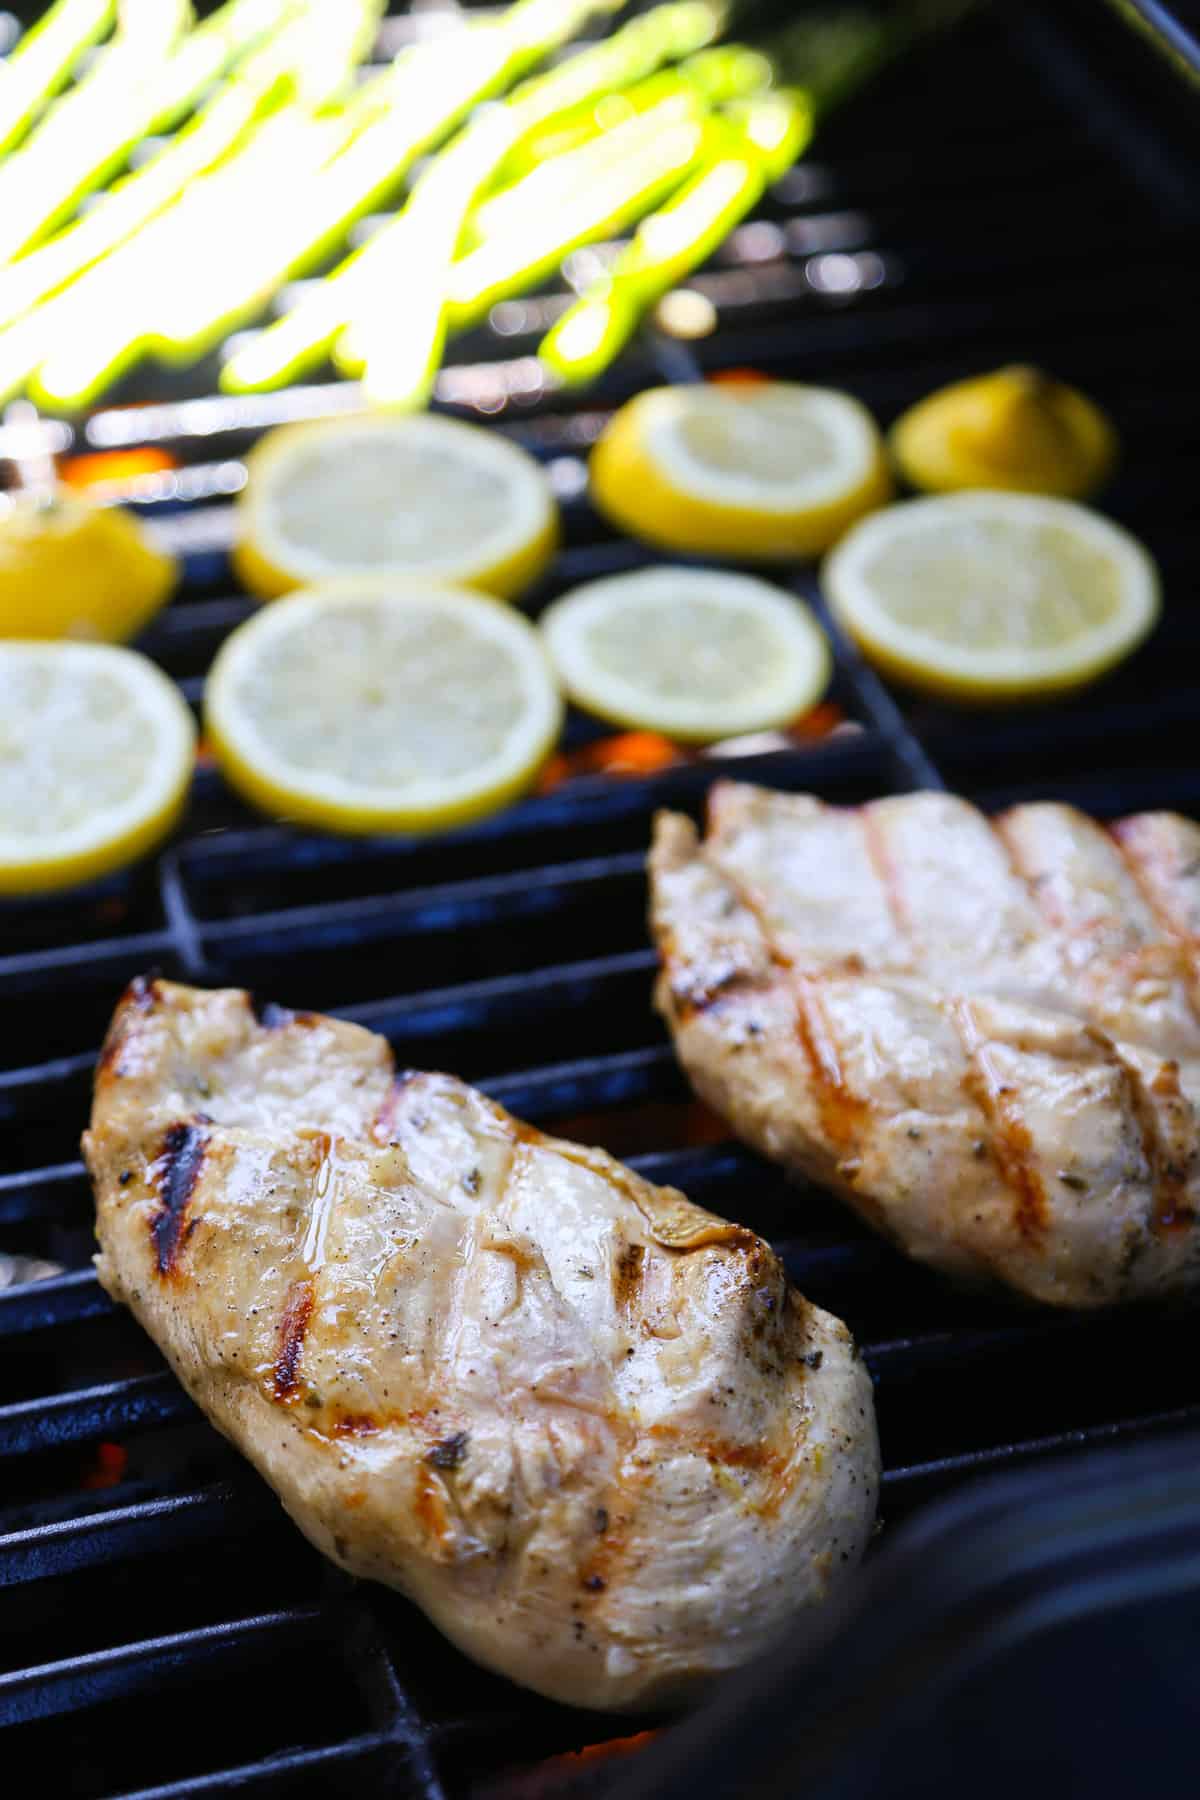 Lemon Garlic Chicken and lemon slices cooking on a grill.